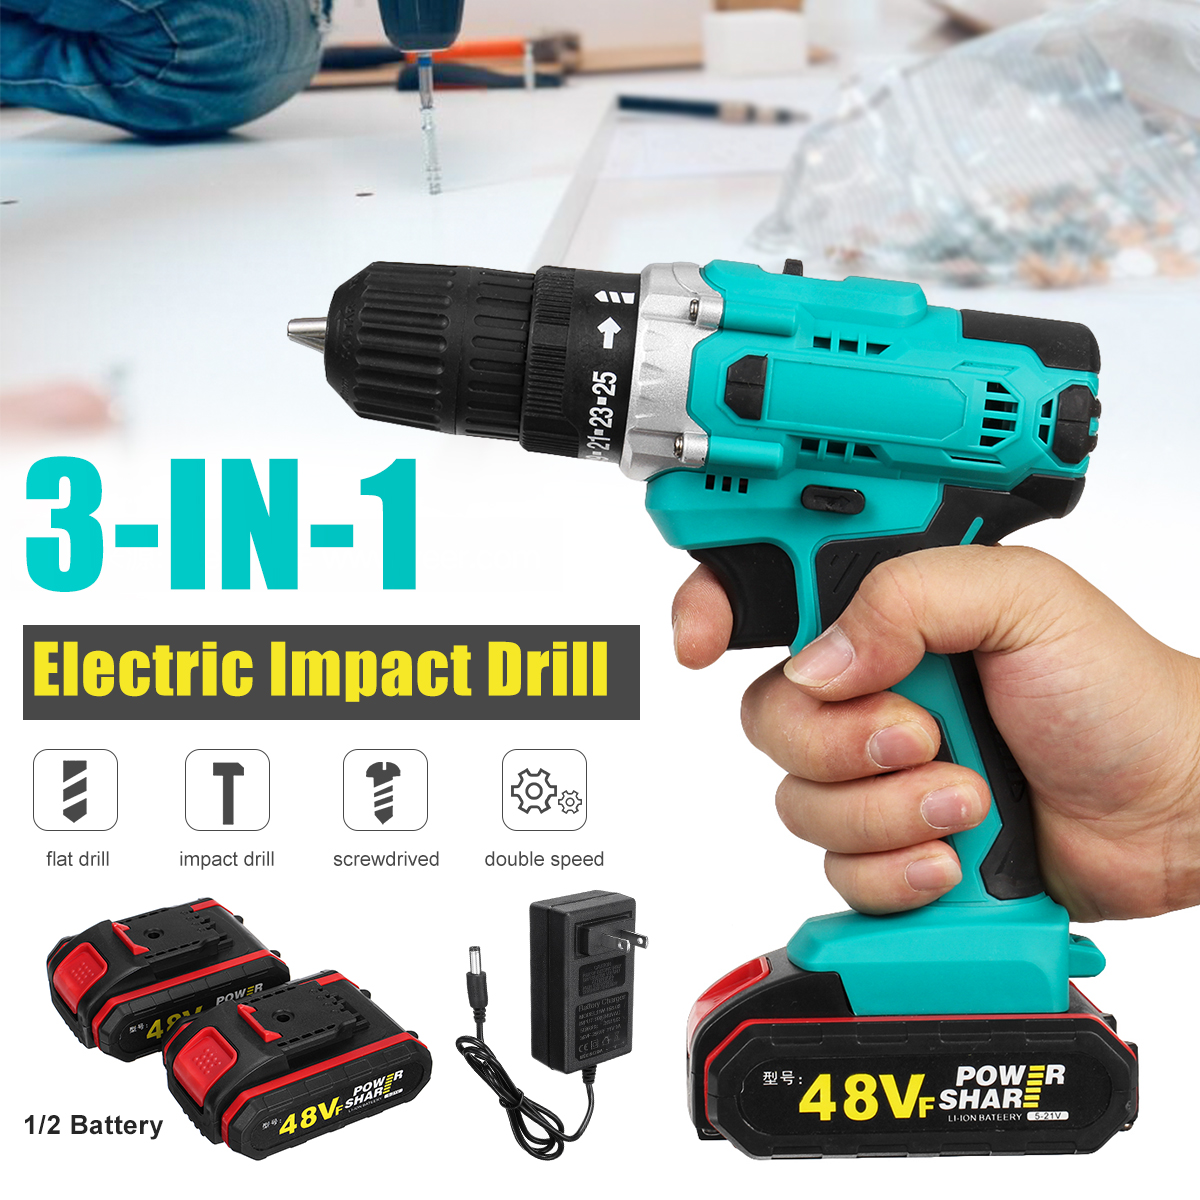 48vf-3-In-1-Multifunctional-Cordless-Drill-Electric-Torque-Wrench-Screwdriver-Drill-38-Inch-Chuck-Co-1843520-1